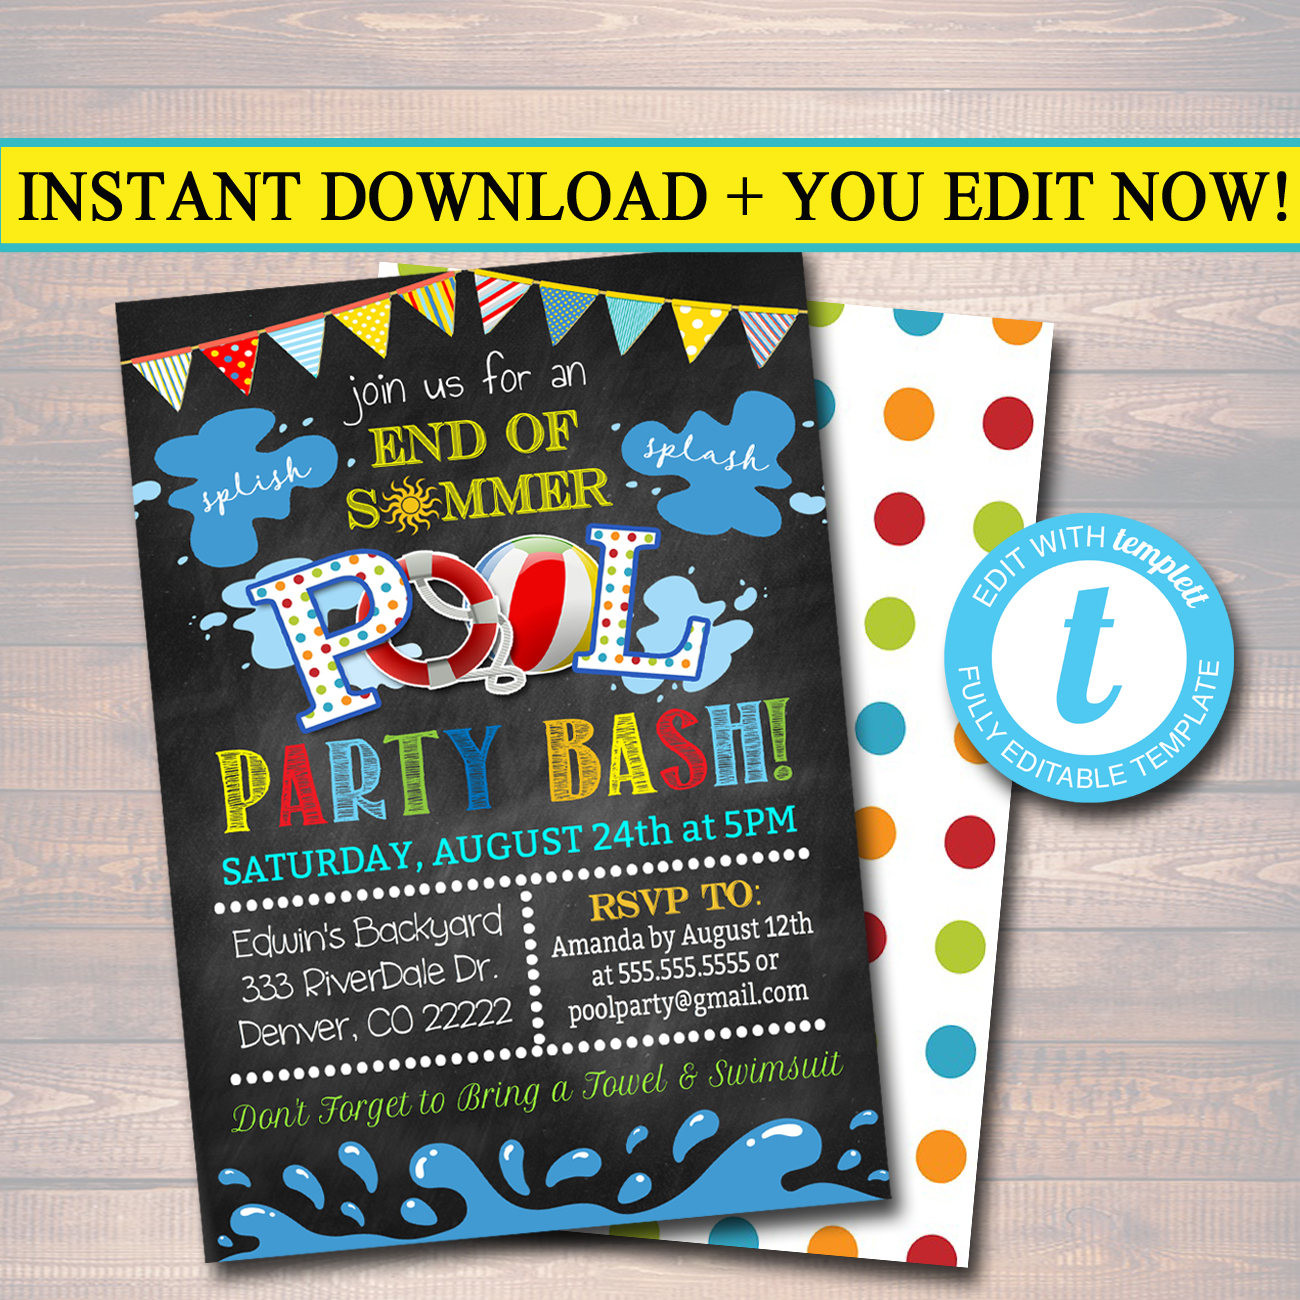 End Of Summer Party Invites
 EDITABLE End of Summer Pool Party Invitation Printable